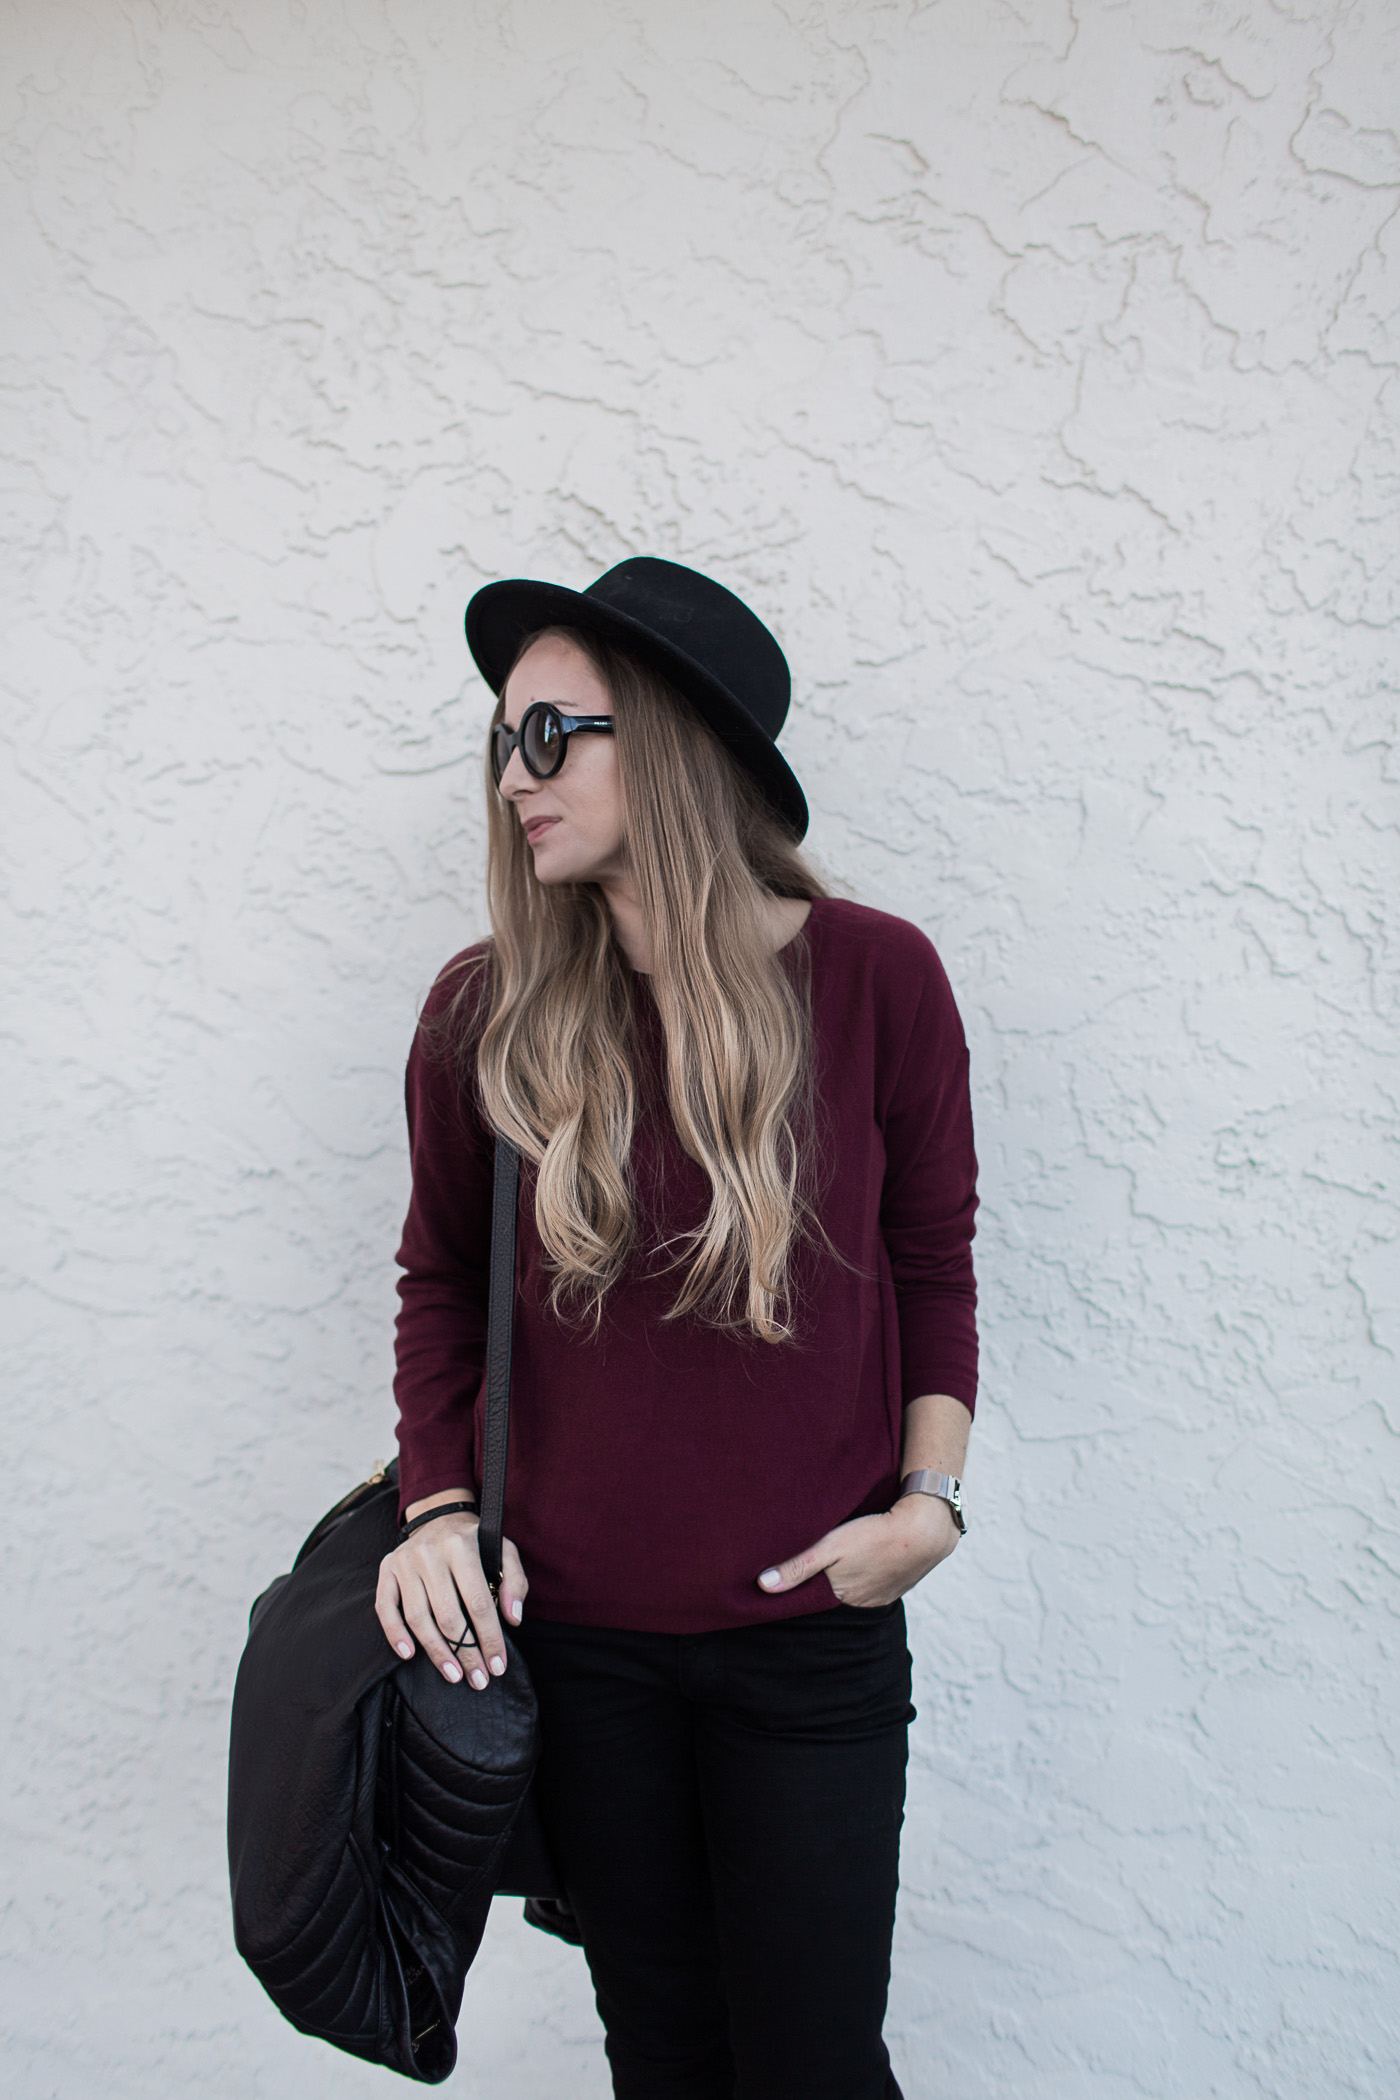 Black skinny denim in a casual outfit. 3 outfits featuring black skinny denim.